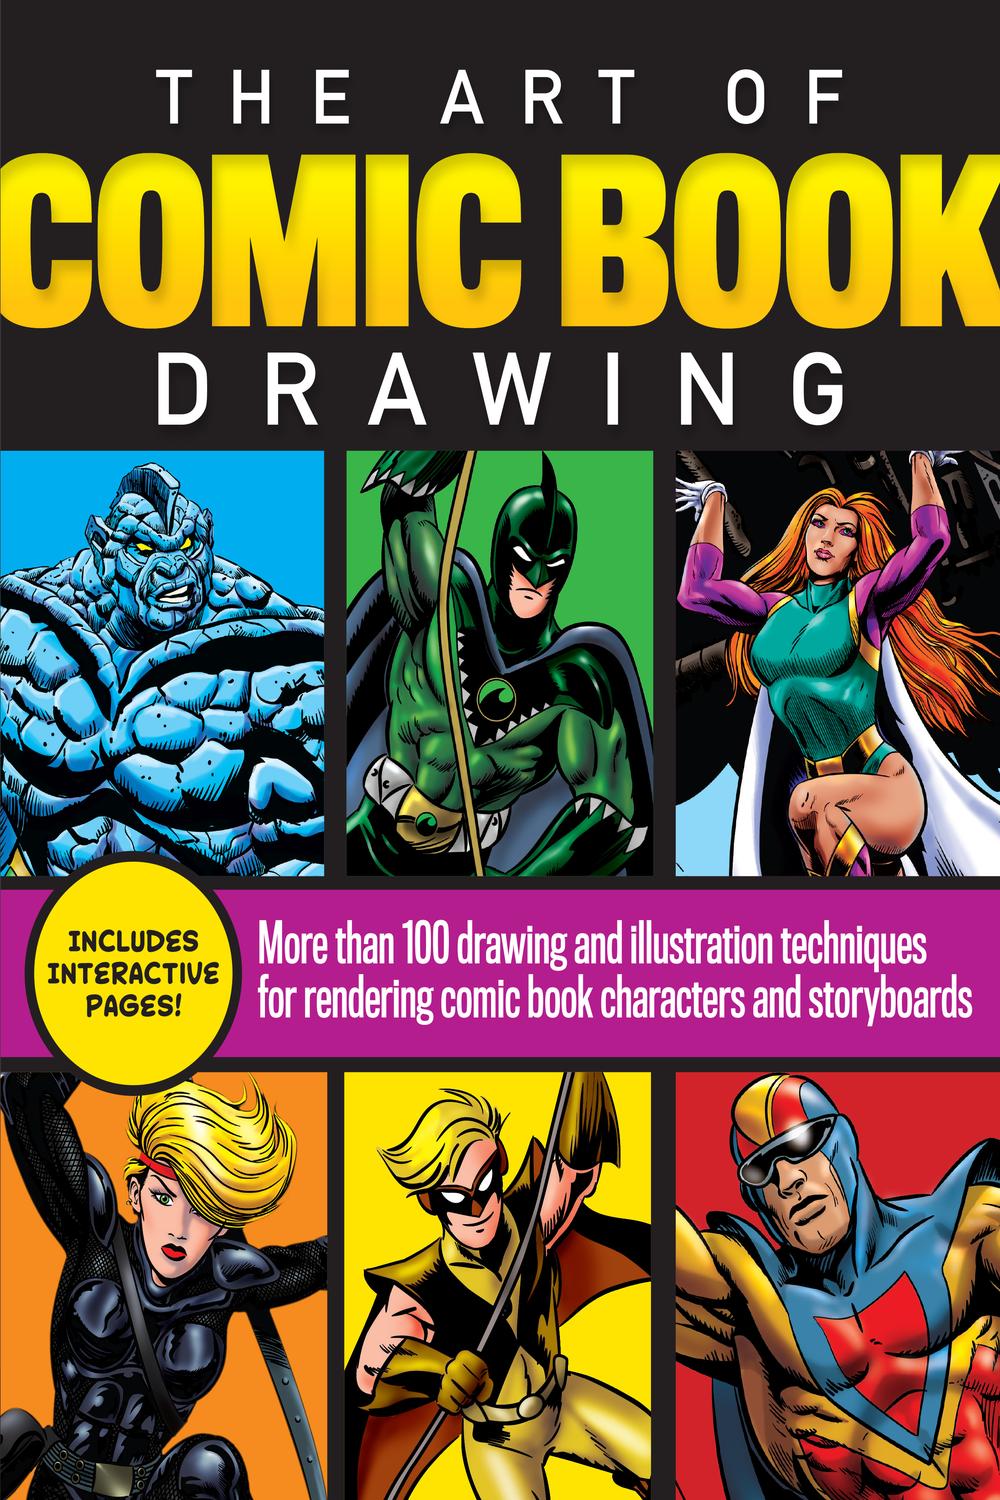 PDF] The Art of Comic Book Drawing by Maury Aaseng eBook | Perlego